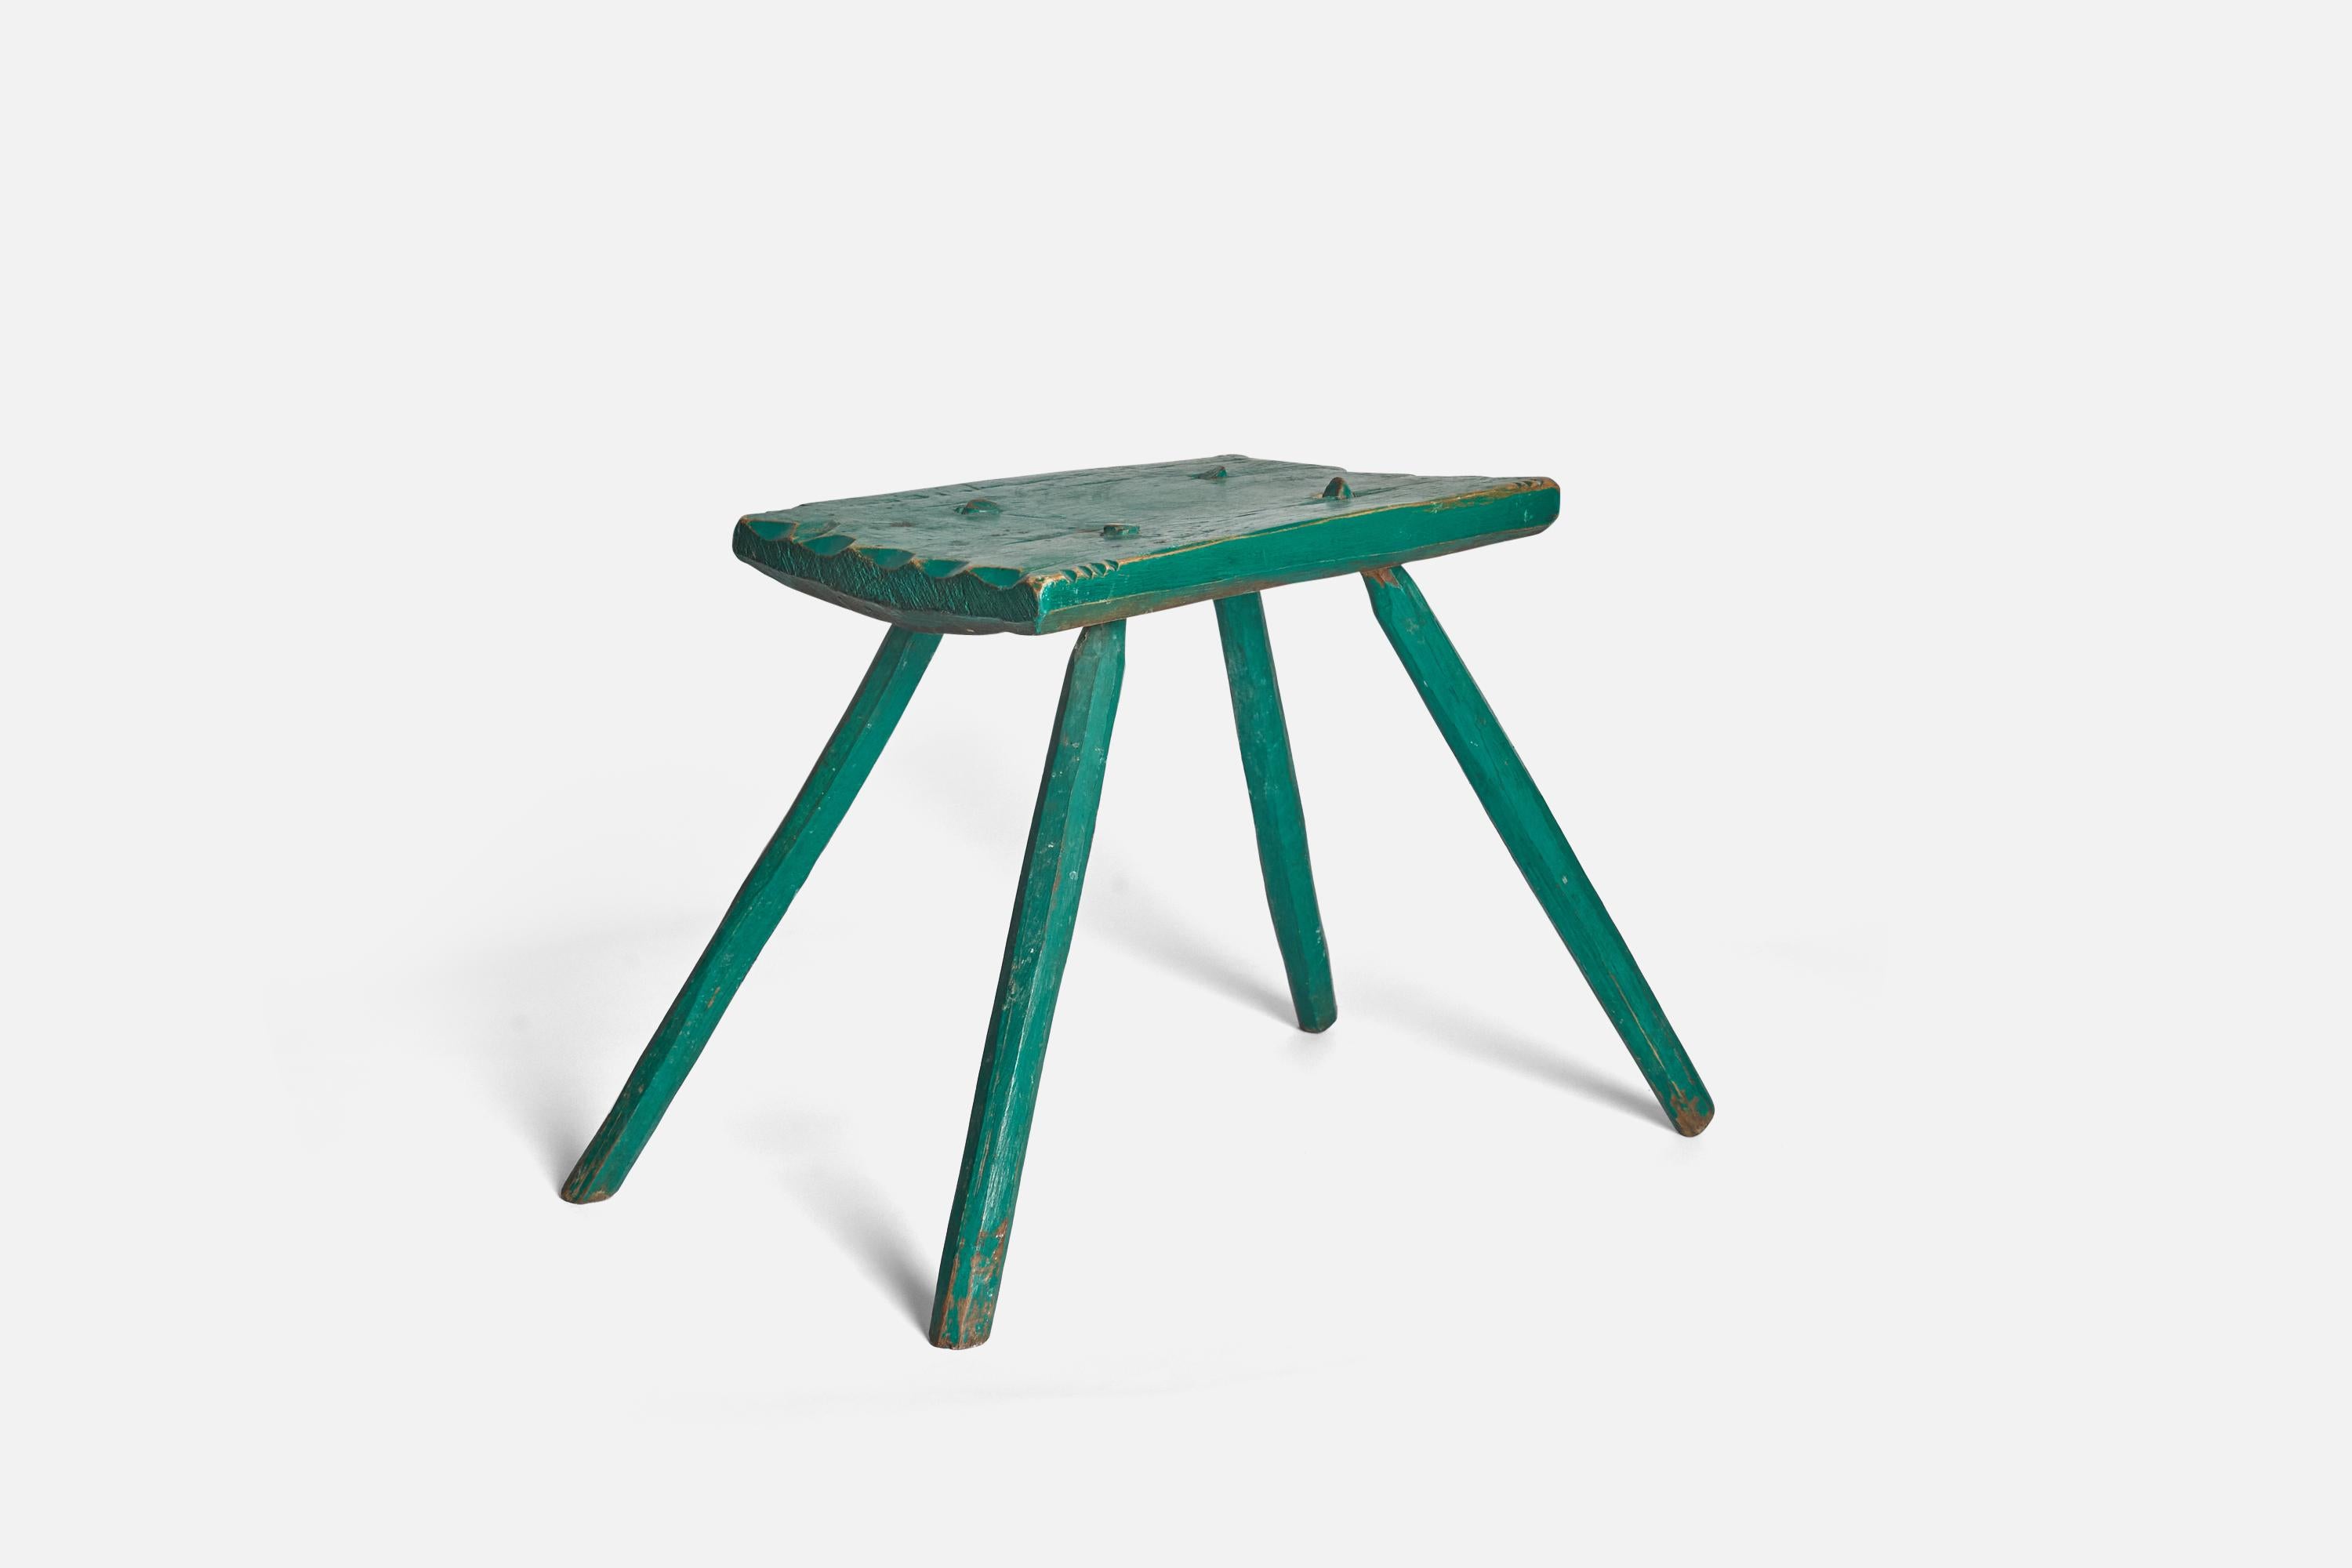 A farmers green-painted wooden stool produced in Sweden, early 19th century. Most likely painted in early 20th century.